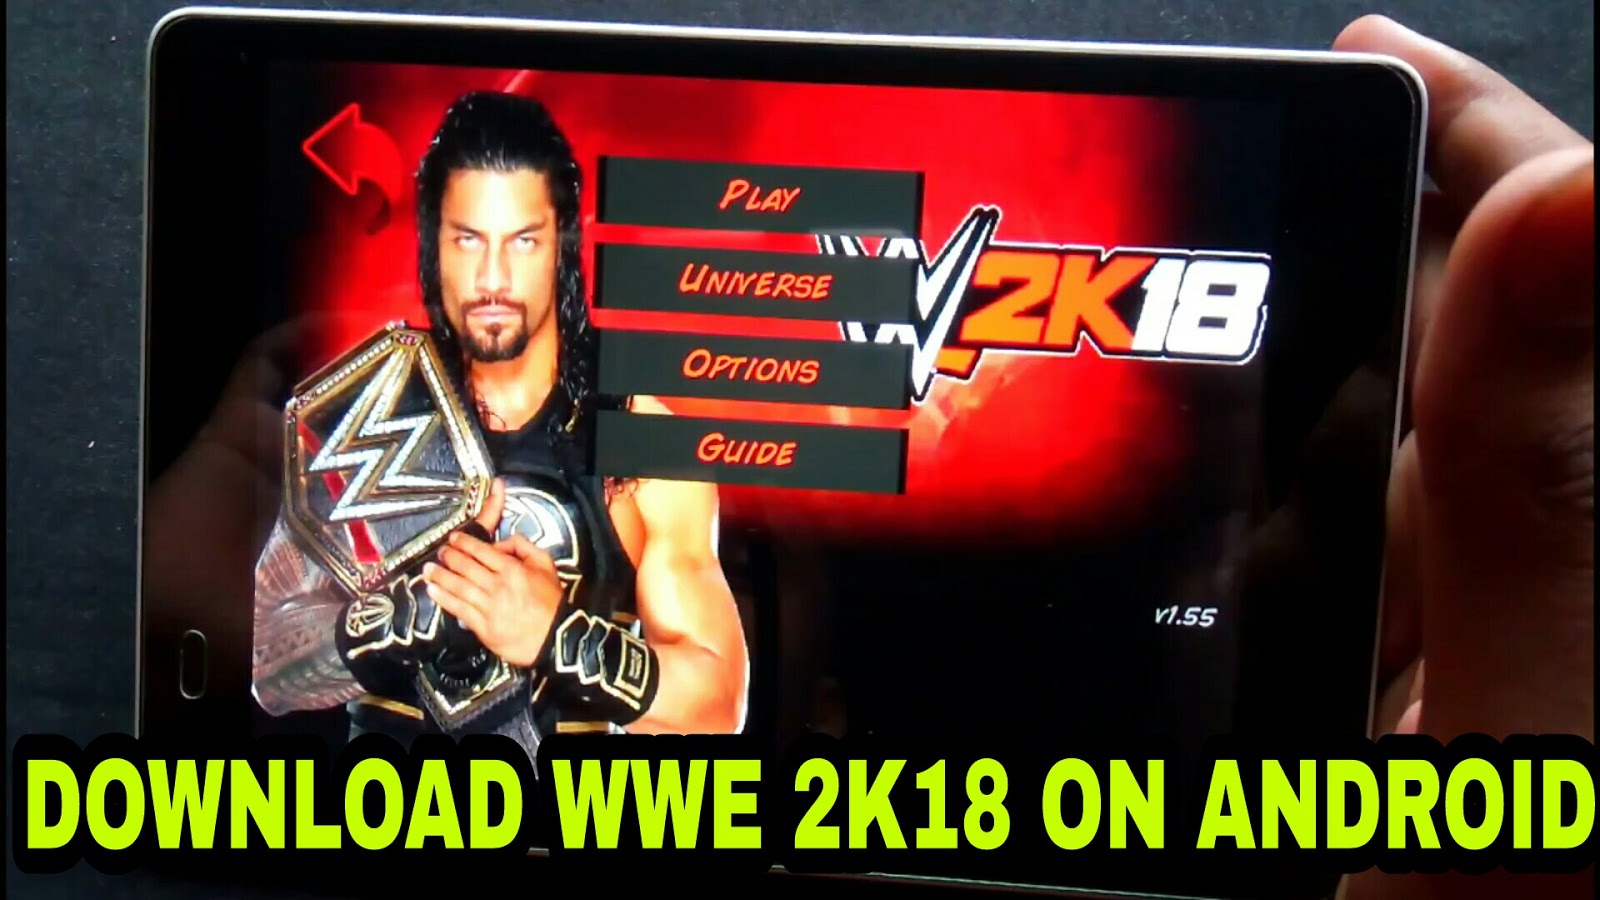 Download wwe 2k18 on Android high graphics just in 50Mb ...